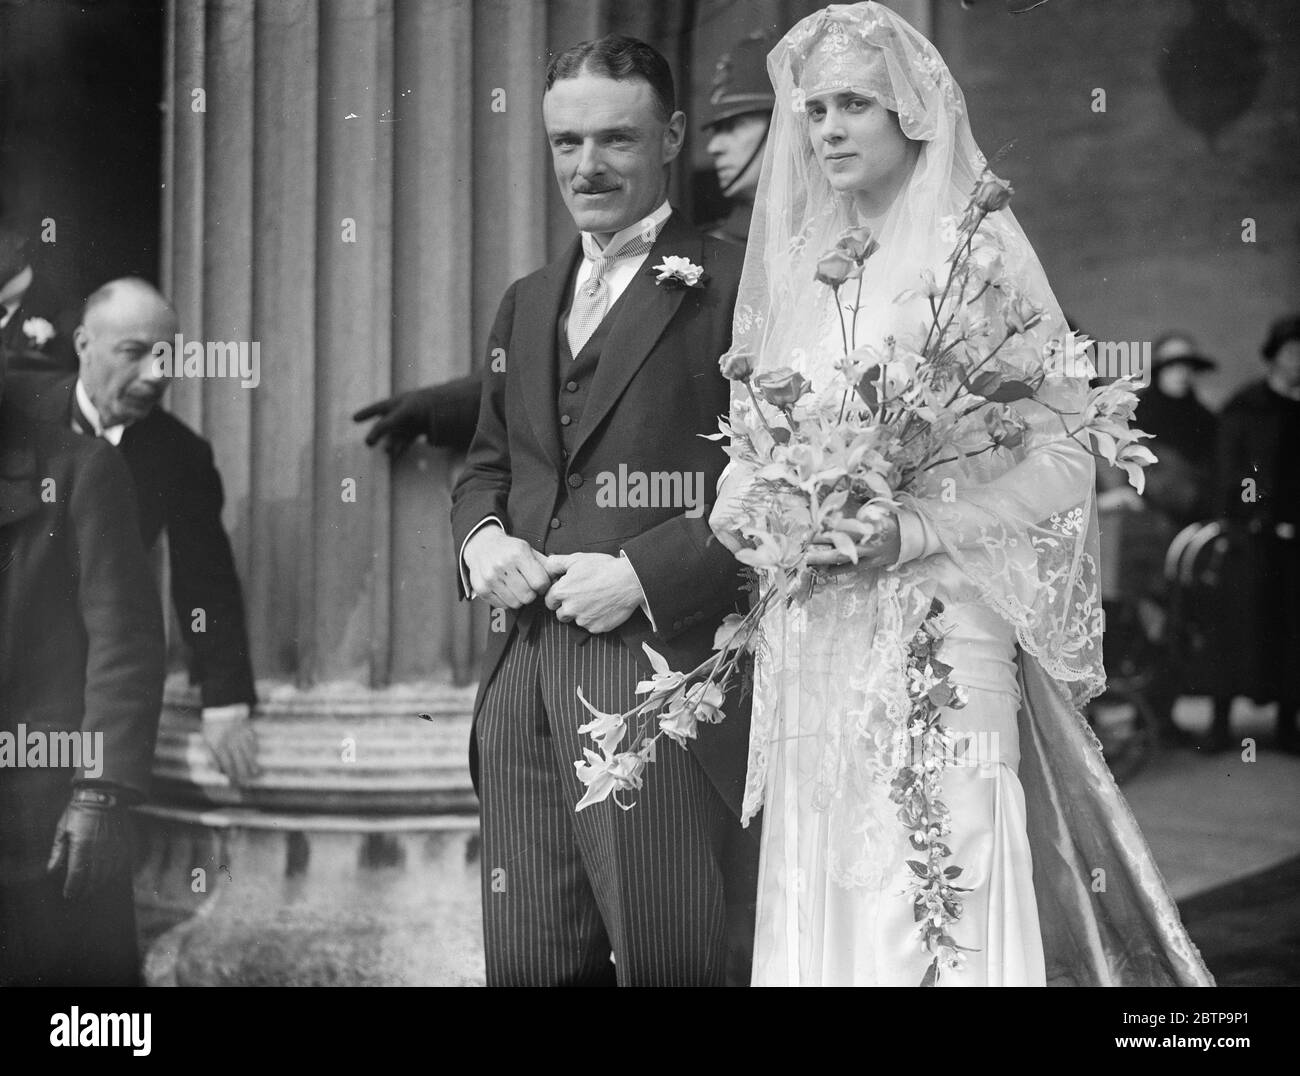 Wedding . Captain A P CAmpbell and Miss P Bax Ironside were married at St Peter ' s , Eaton Square . Bride and bridegroom . 25 March 1926 Stock Photo